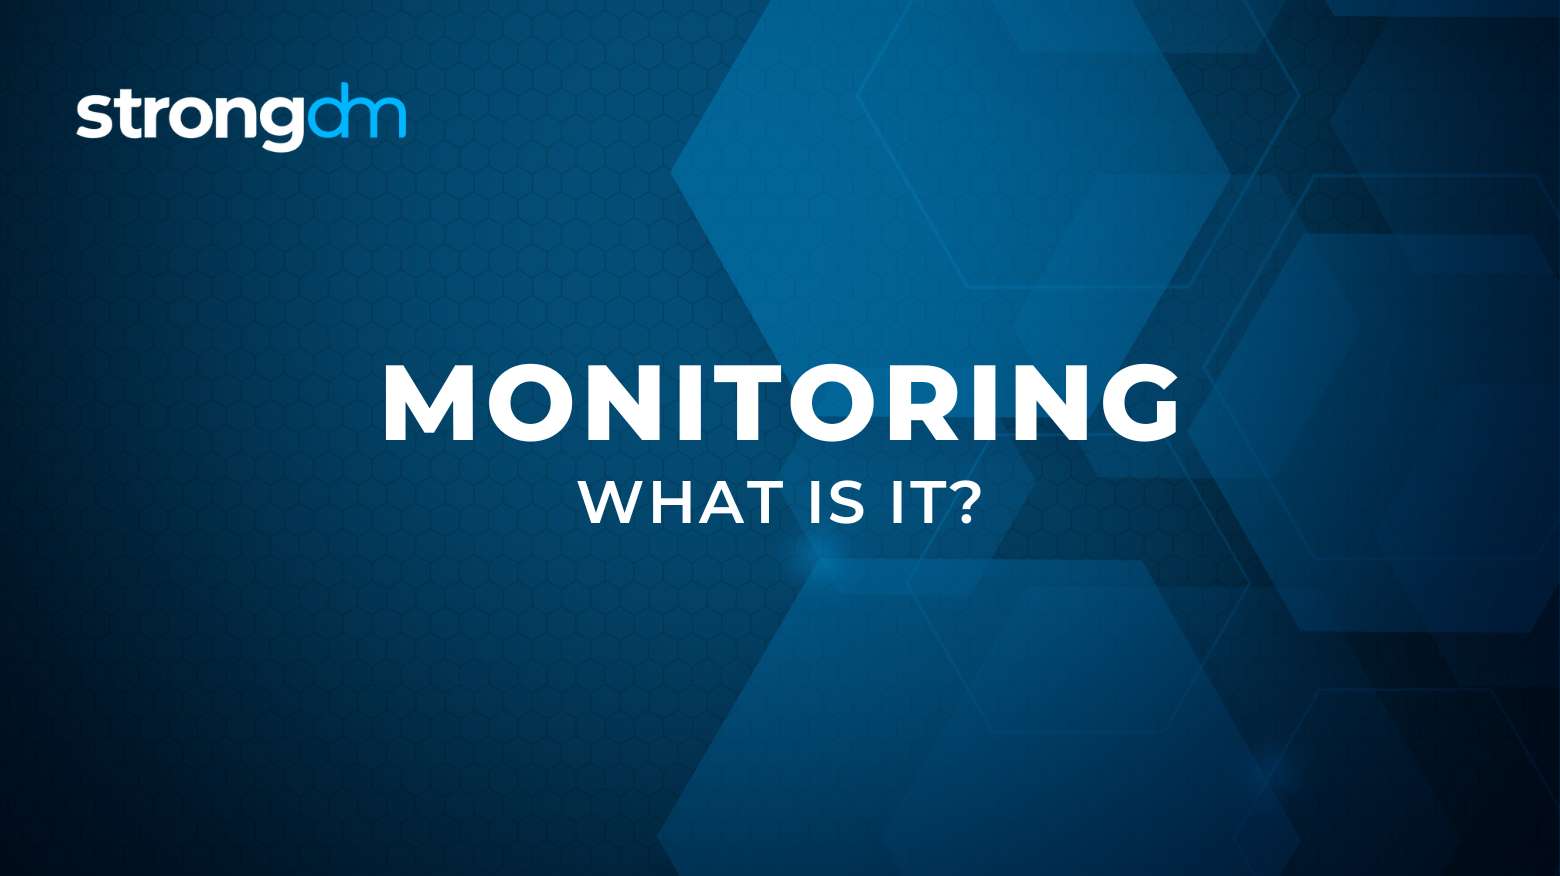 What is Monitoring?